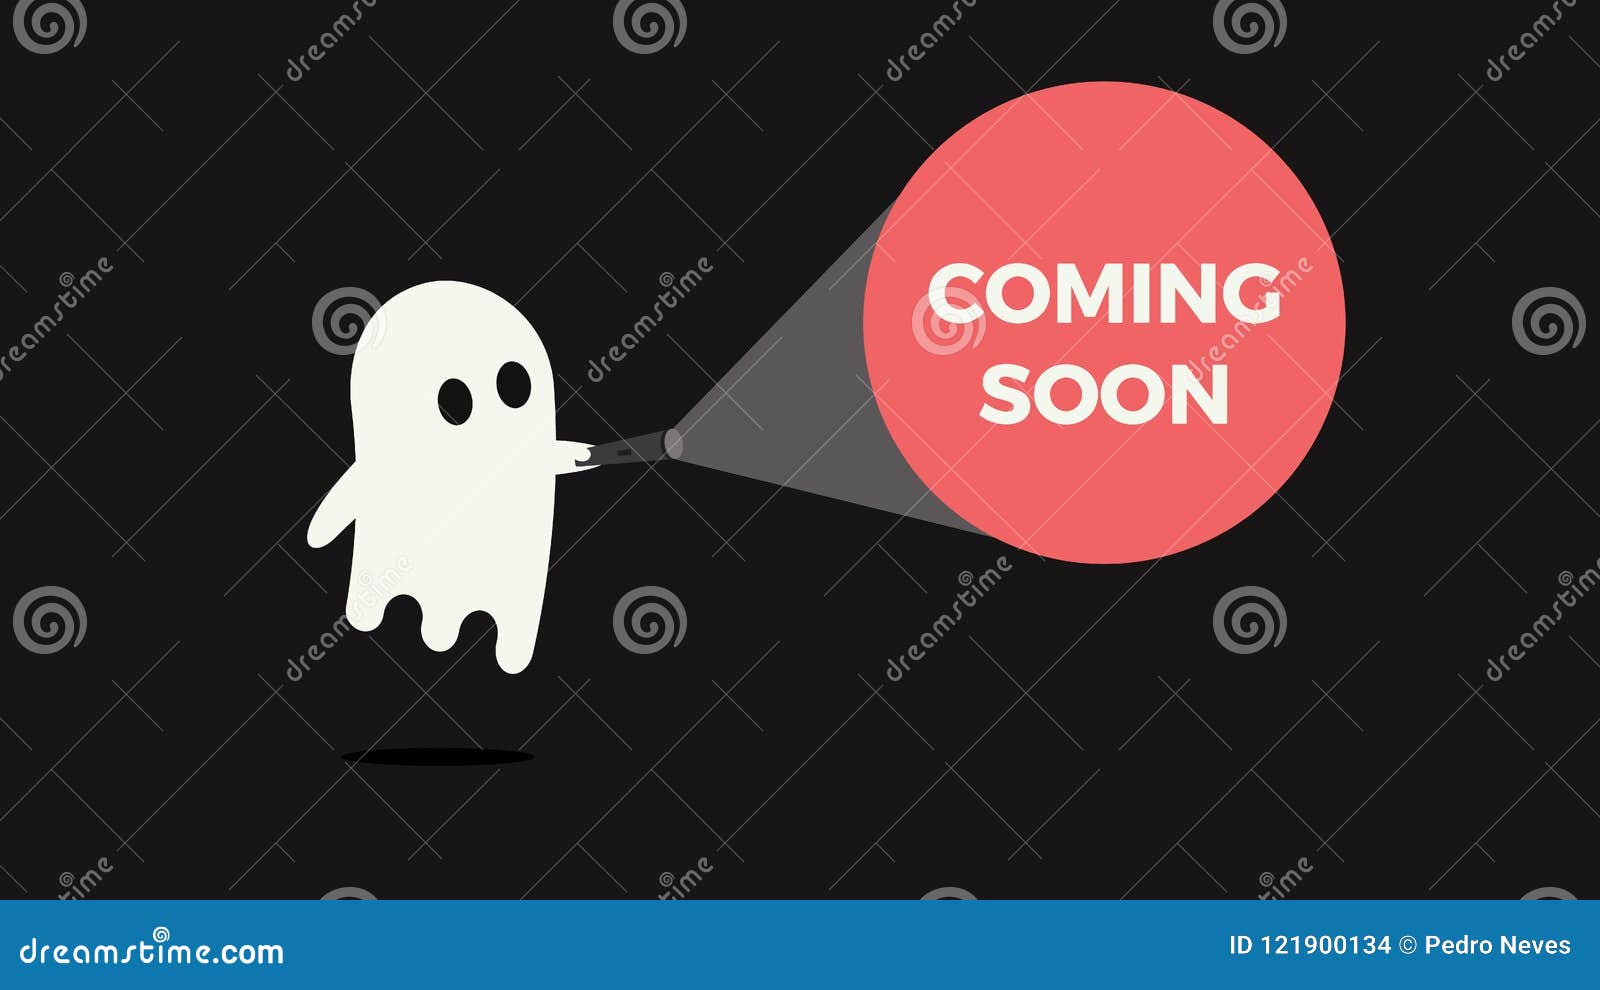 cute ghost with his flashlight pointing towards a message for new product or movie coming soon.